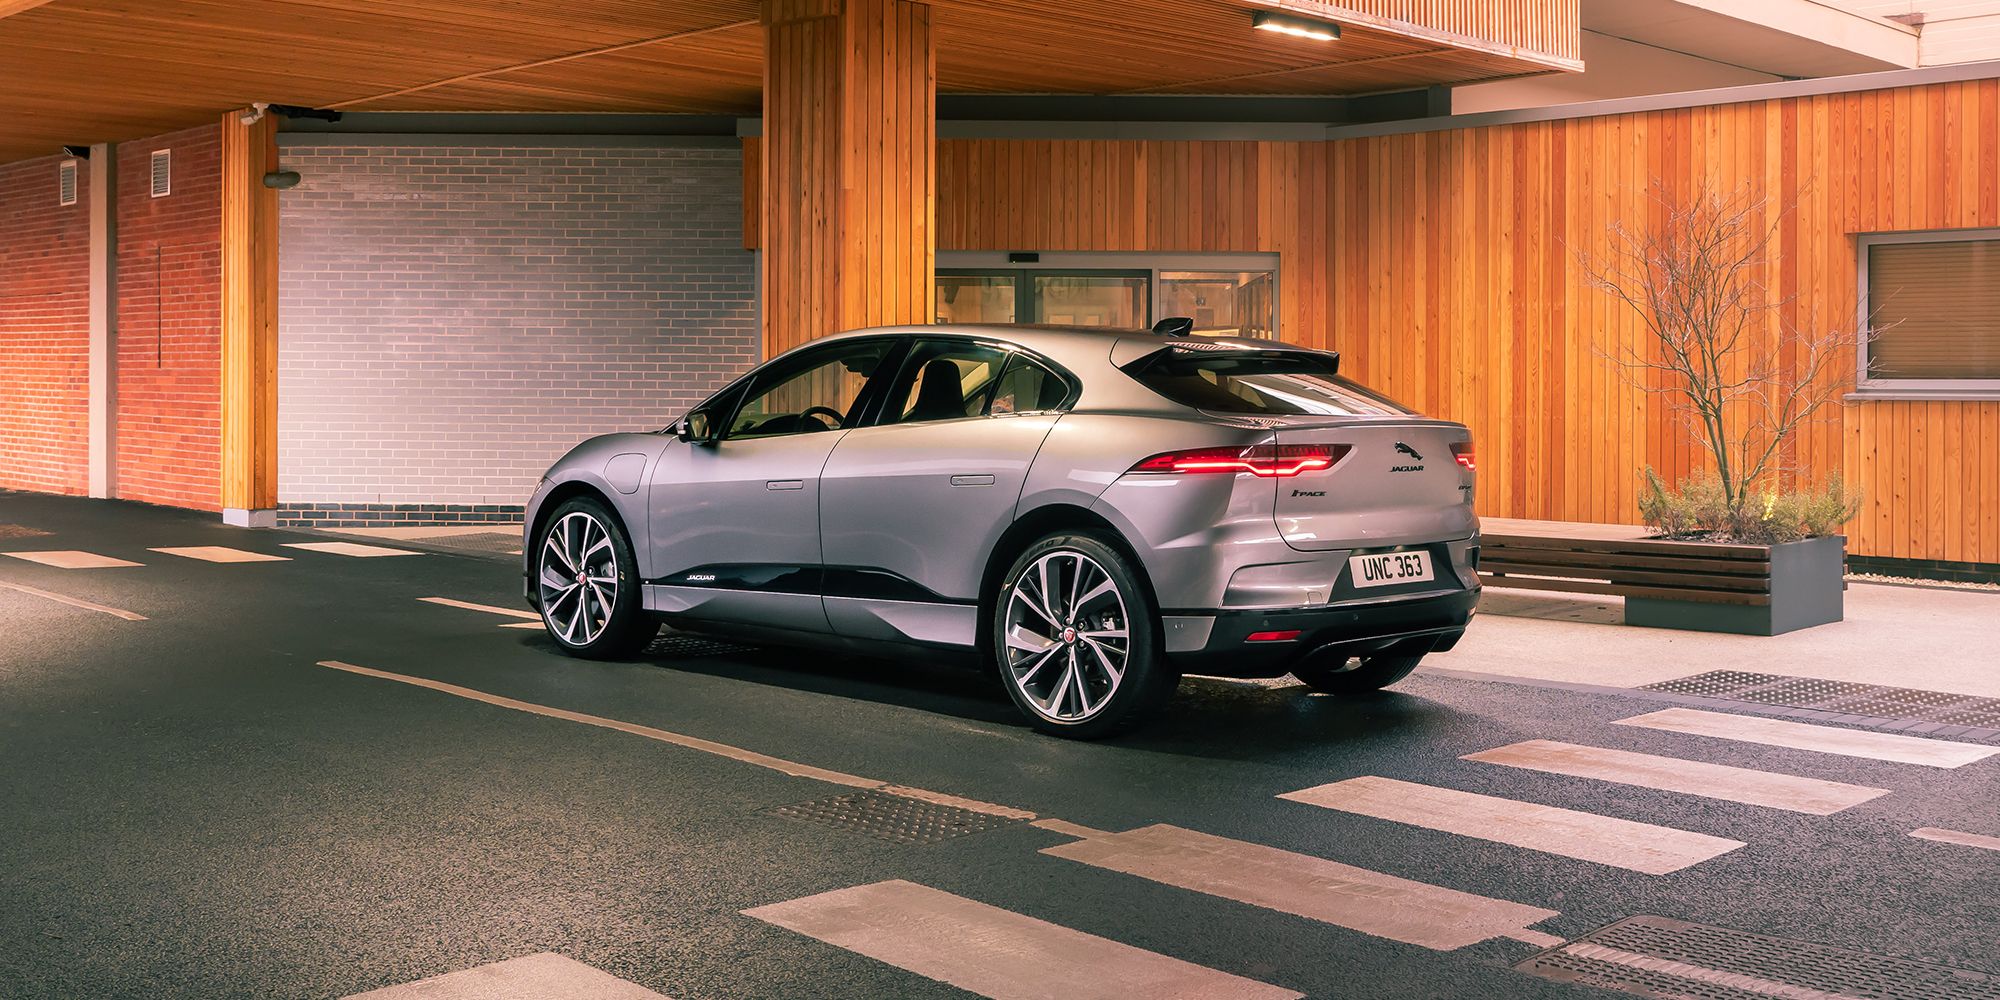 Rear 3/4 view of a silver I-Pace